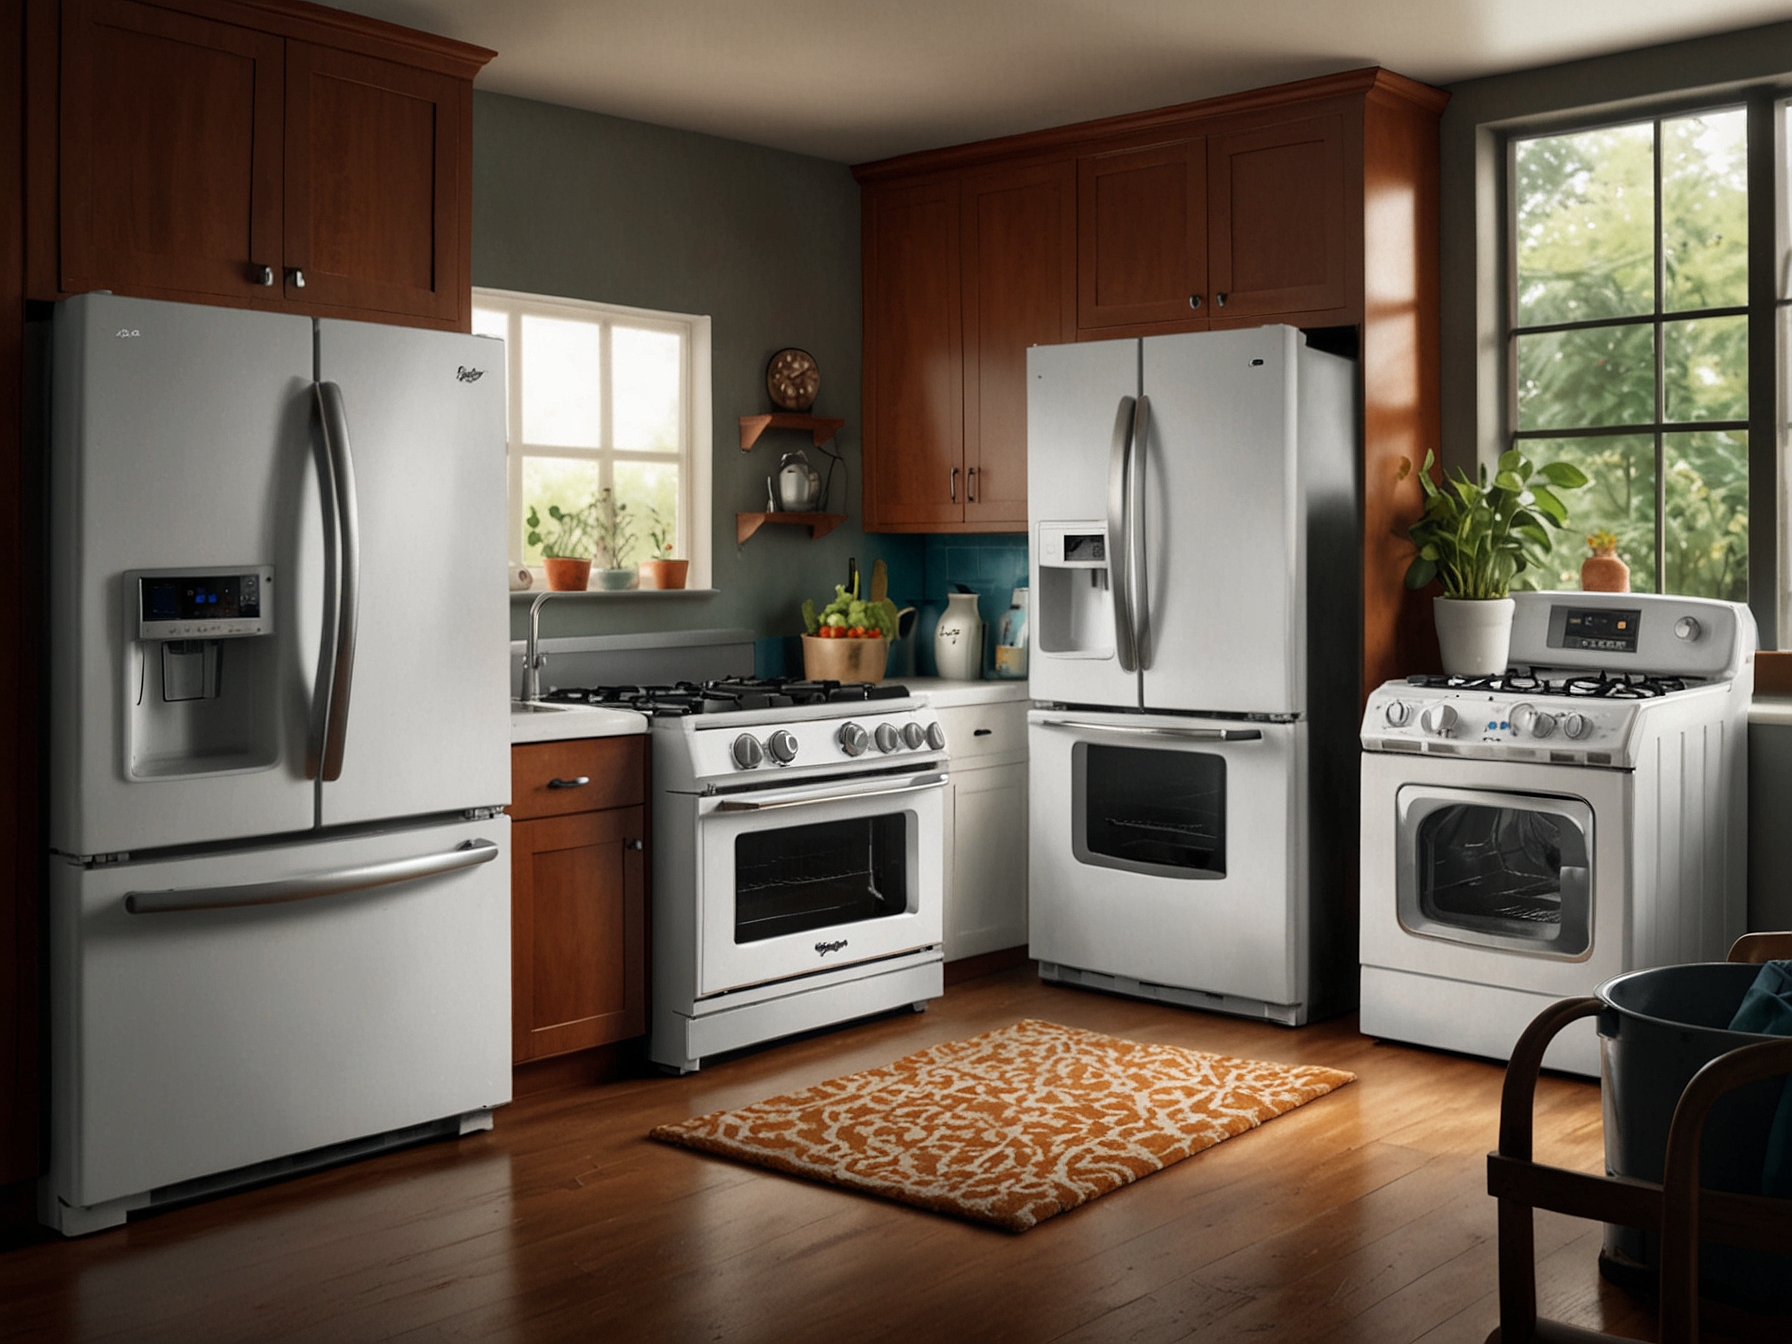 An array of Whirlpool appliances, including refrigerators, washing machines, and ovens, showcasing the brand's extensive product range and market presence.